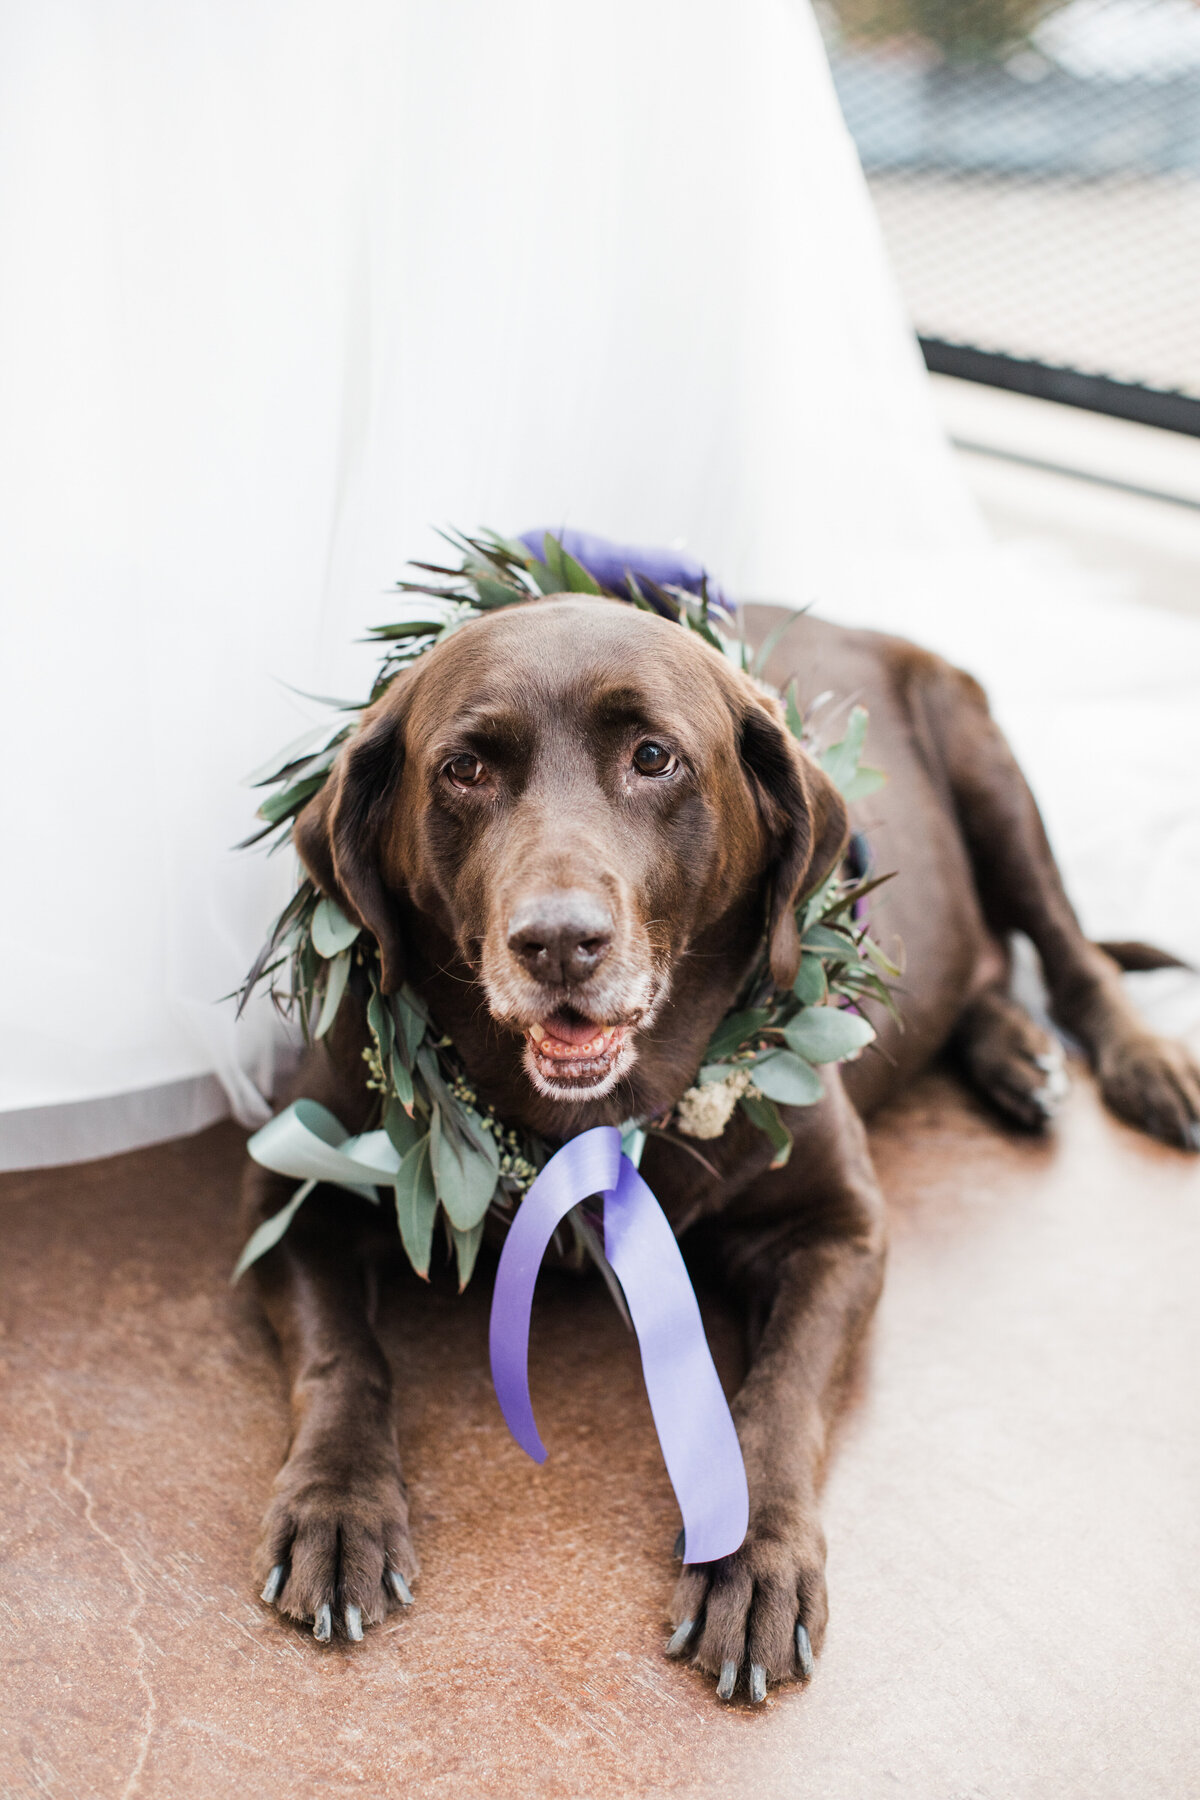 A portrait of a family dog as the ring bearer for a wedding ceremony in Dallas, Texas. The large brown dog is resting peacefully on the ground while wearing a wreath of flowers with purple ribbons around its neck.